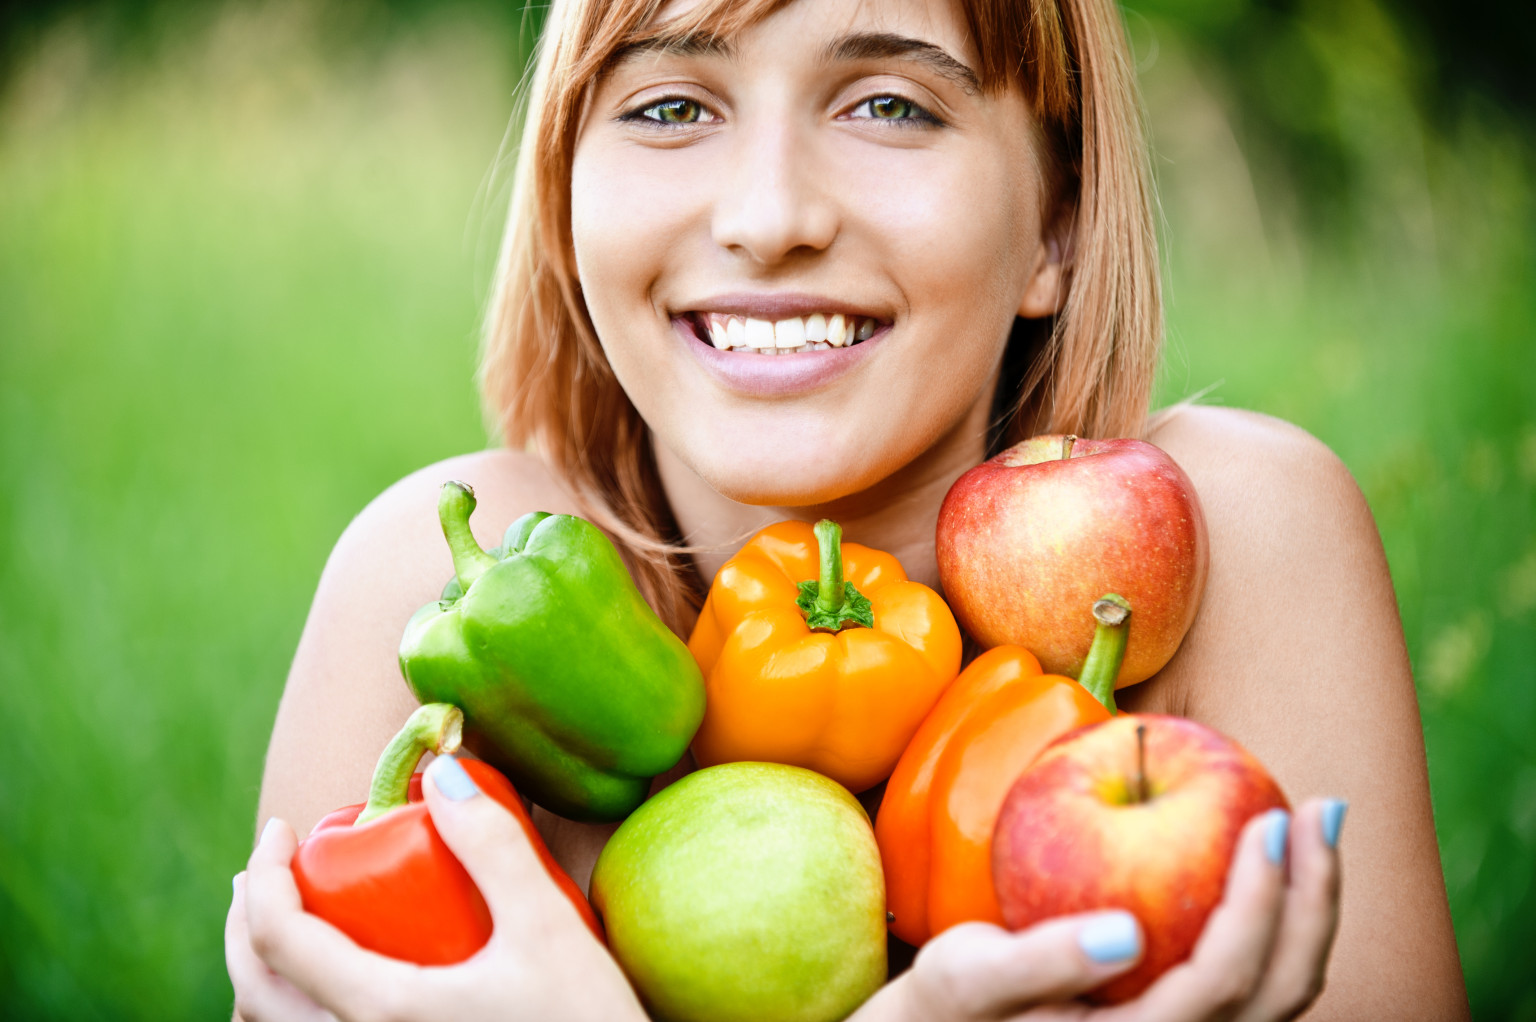 Positive Attitudes Toward Healthy Eating Linked To Diet Quality | HuffPost